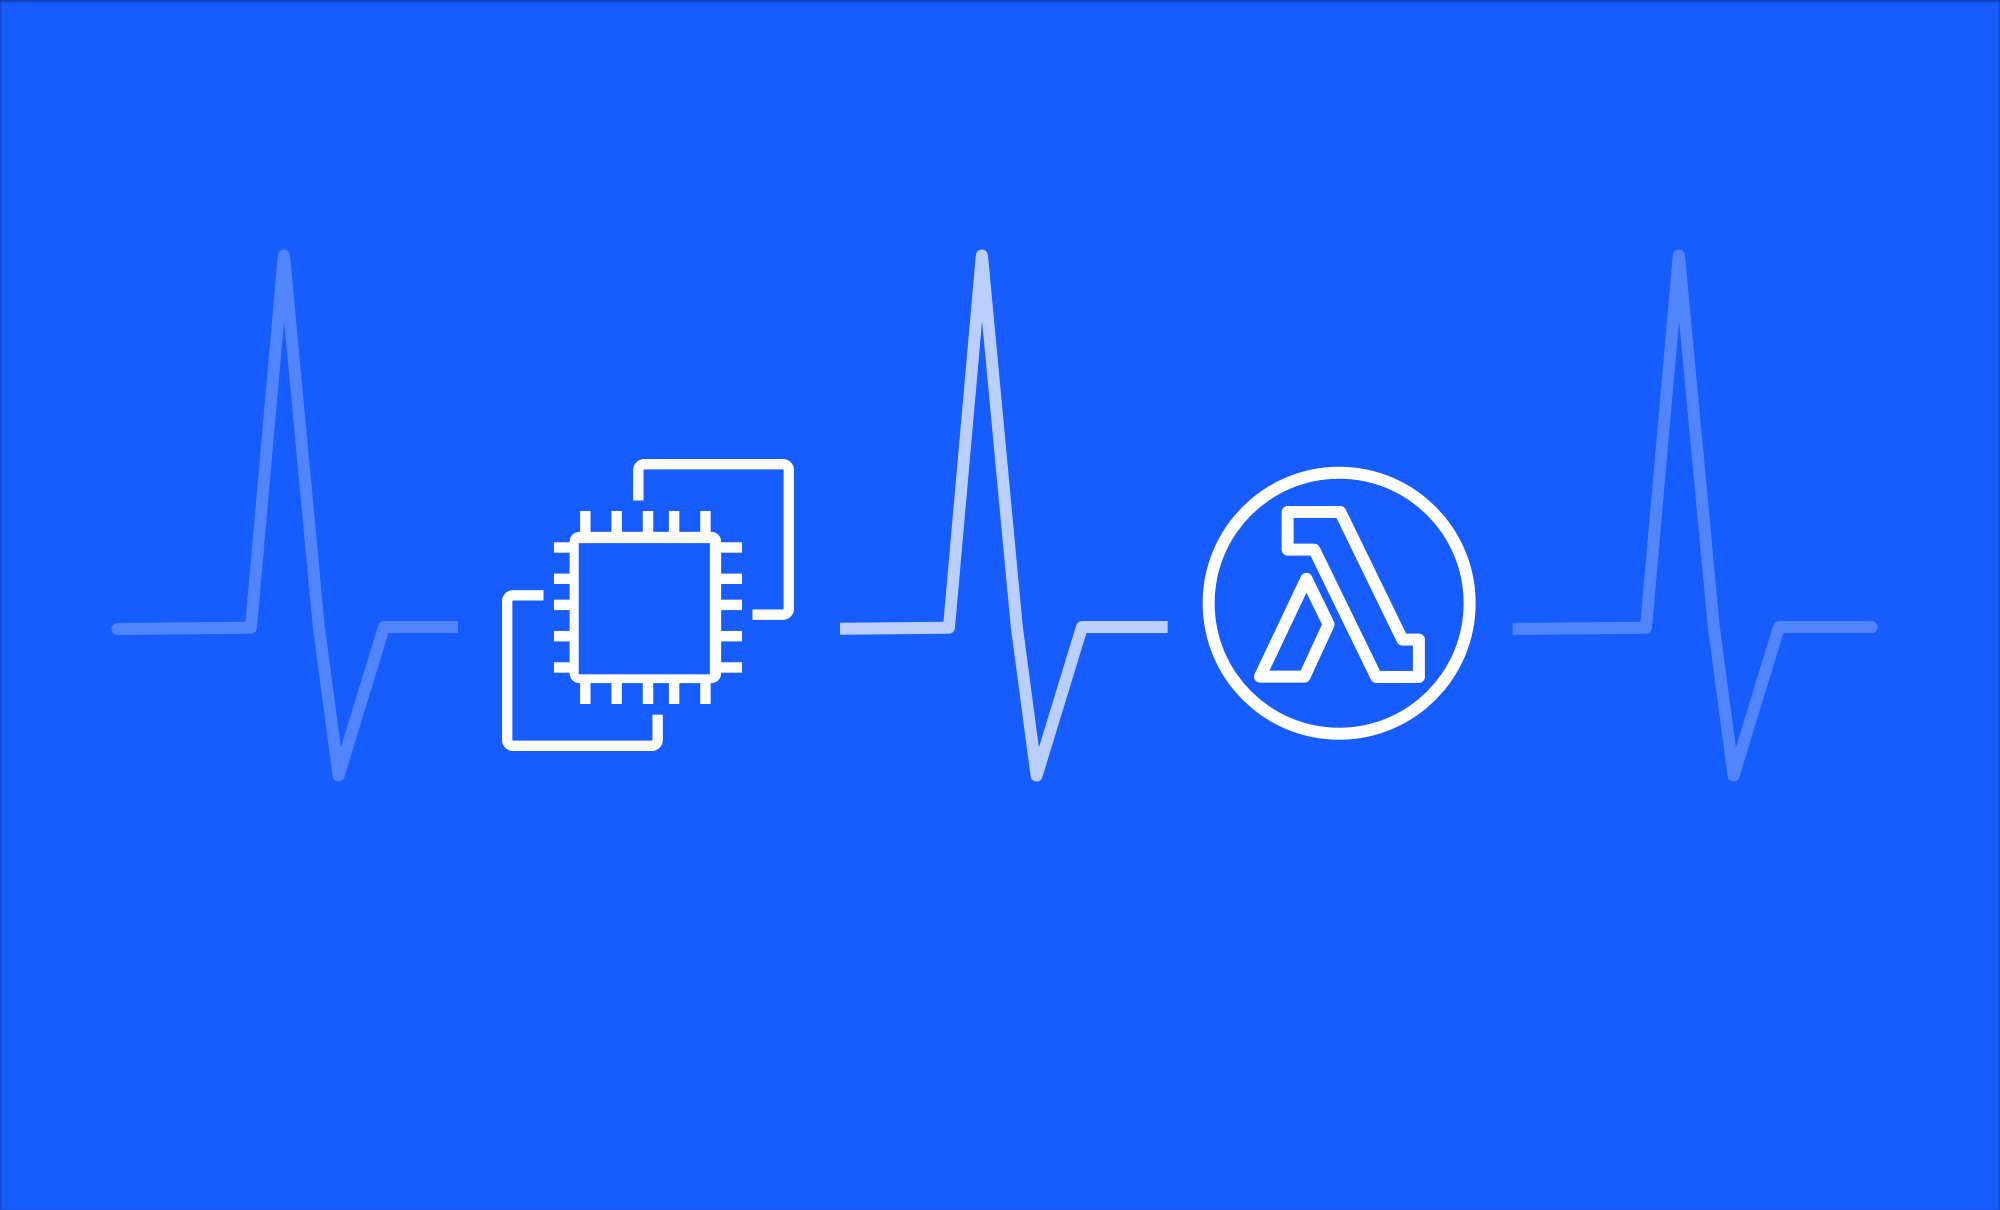 Introducing runtime detection and isolation for Lambda and EC2